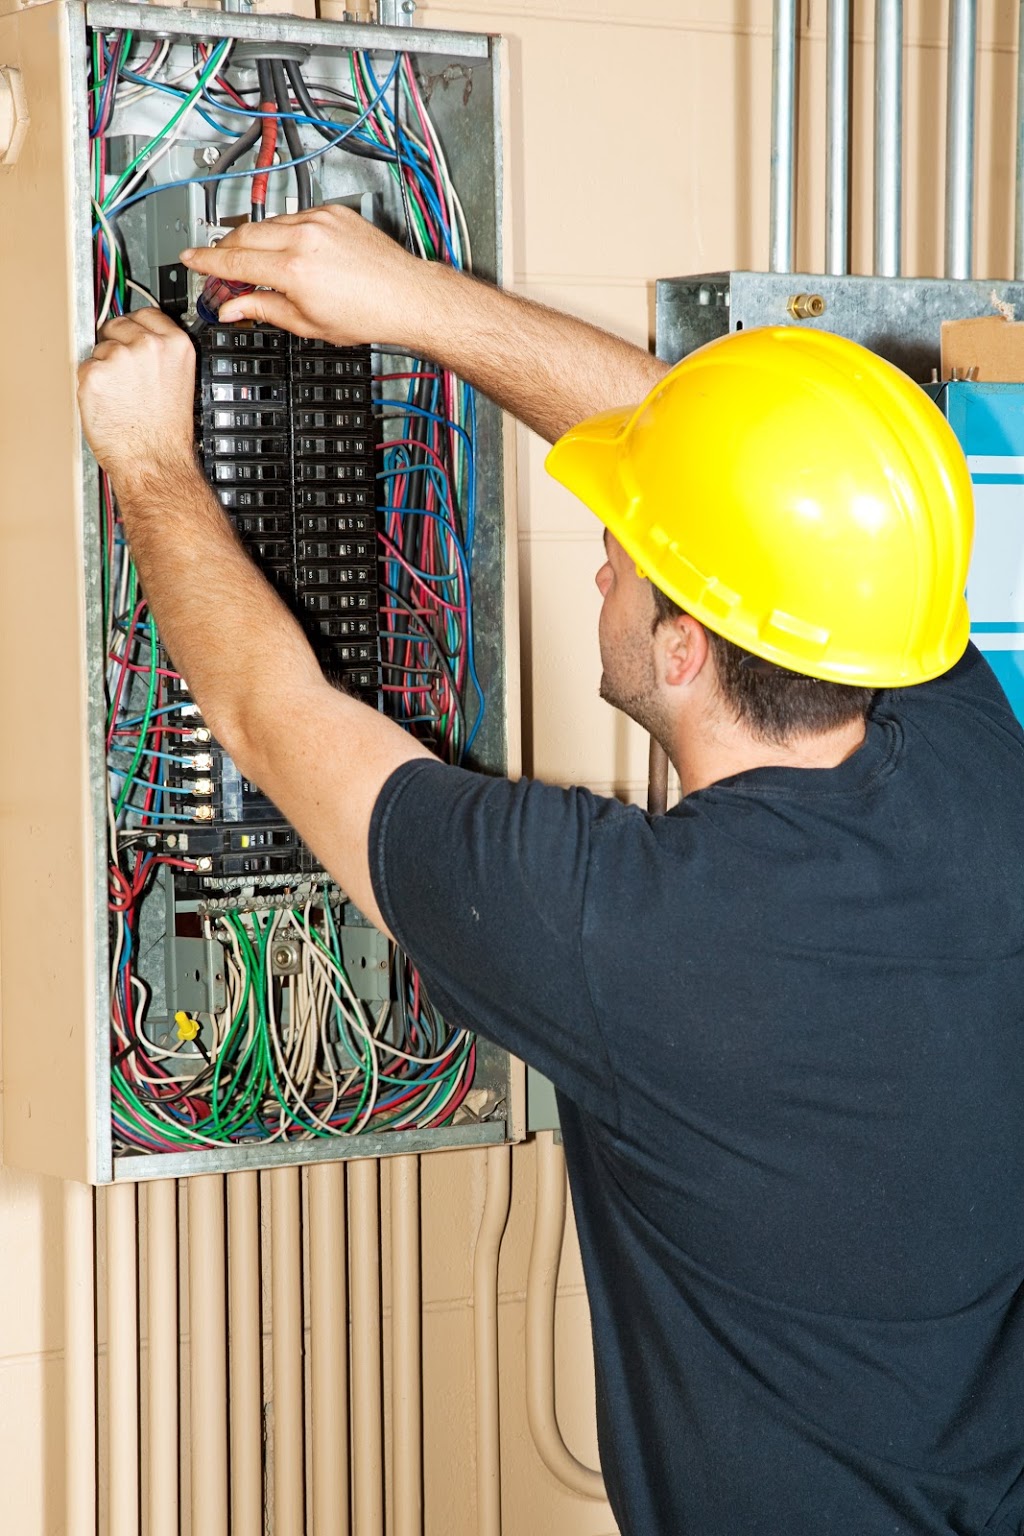 Padstow Heights Electrician | Level 2 Electrcian Padstow Heights, No Power Electrician, Emergency Electric Connect, Padstow Heights NSW 2211, Australia | Phone: 0488 825 559